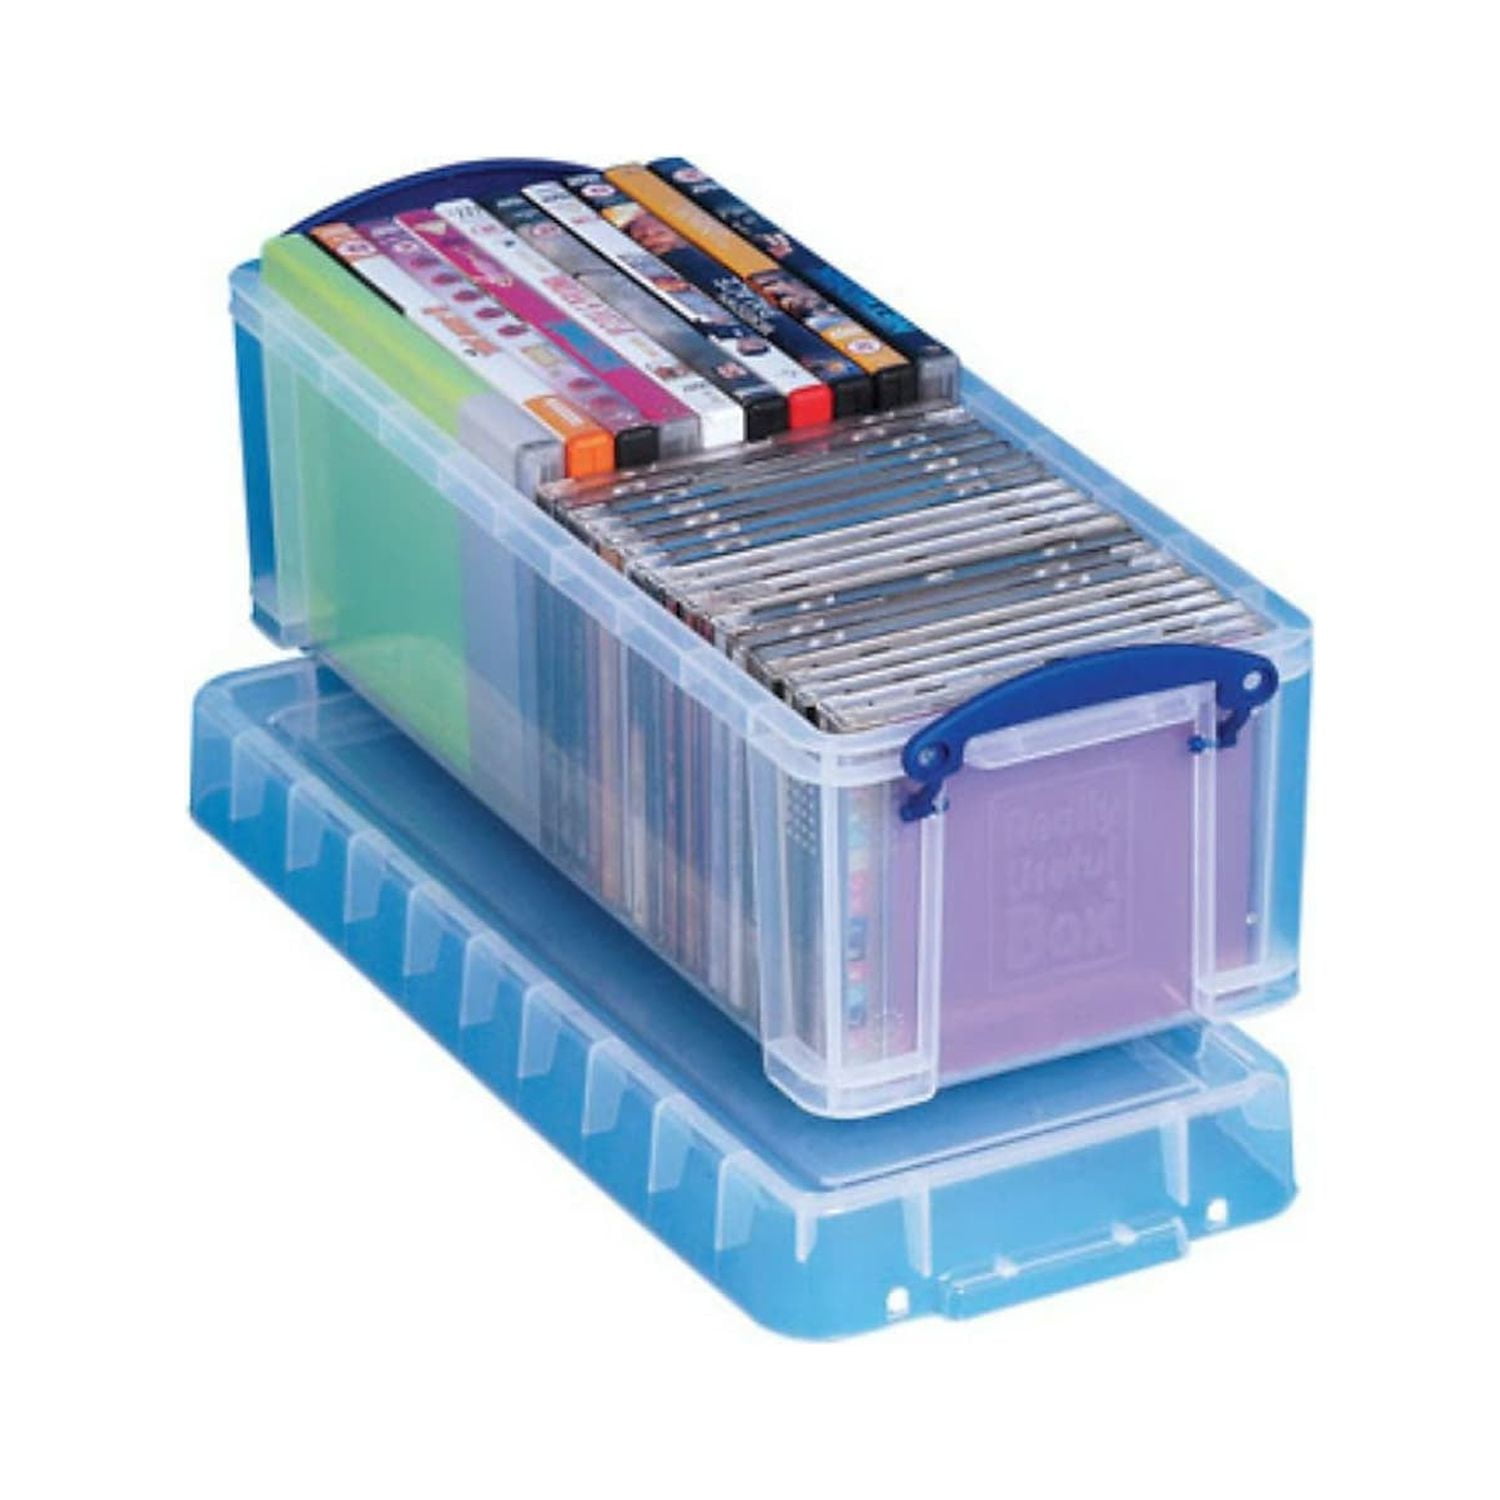 How to choose the right small plastic box for your specific needs